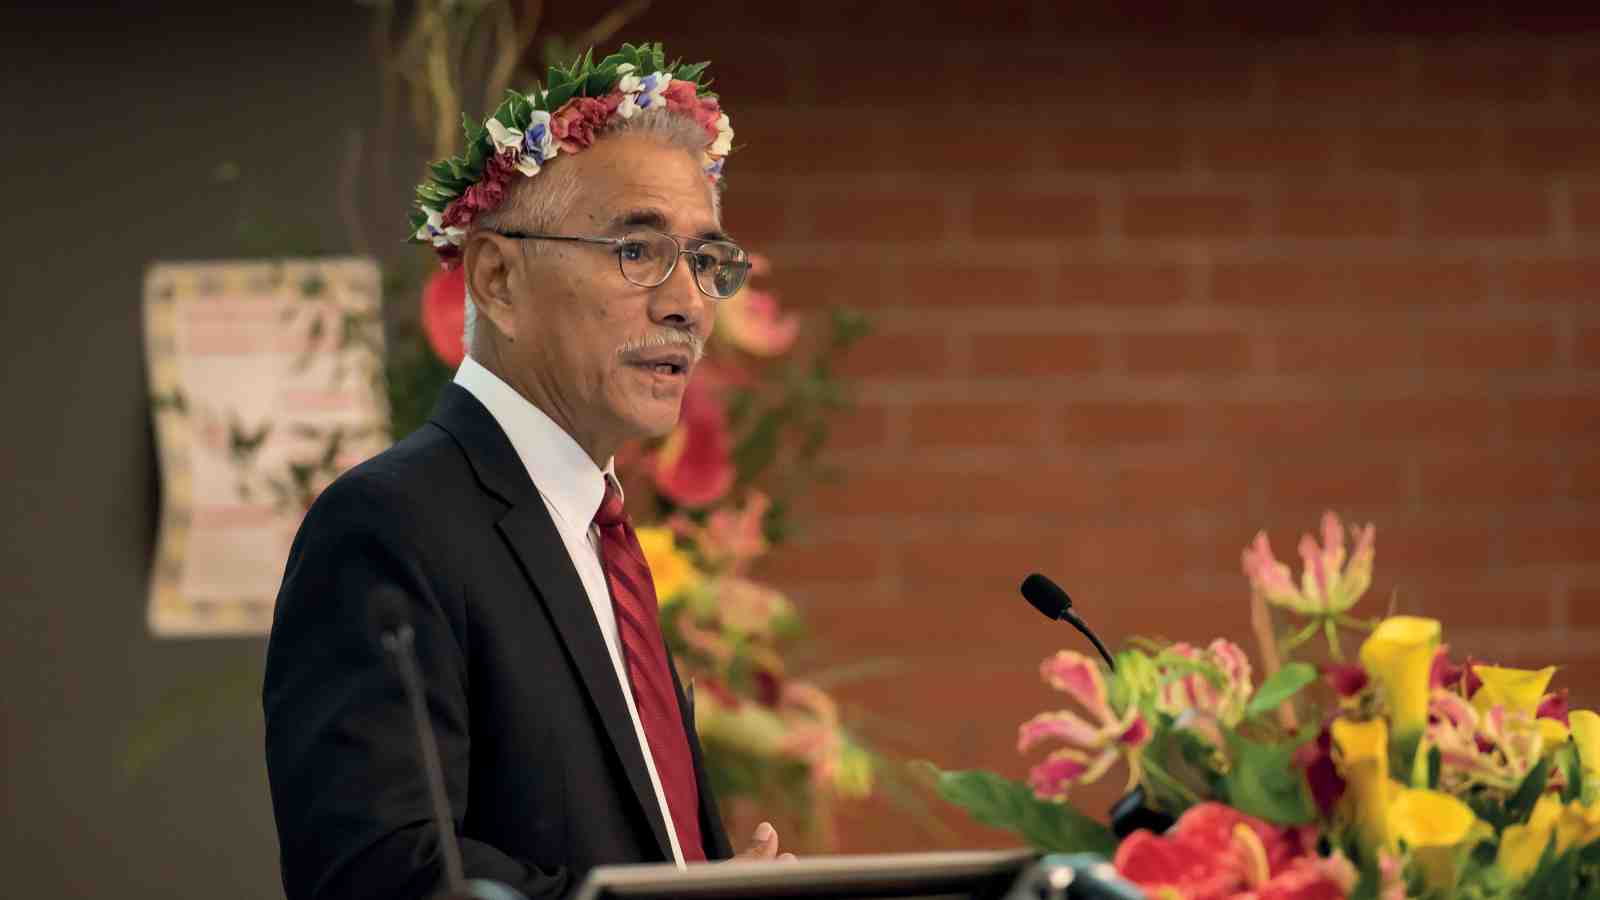 Kirbati's President Anote Tong presents at Victoria's Pacific Climate Change Conference